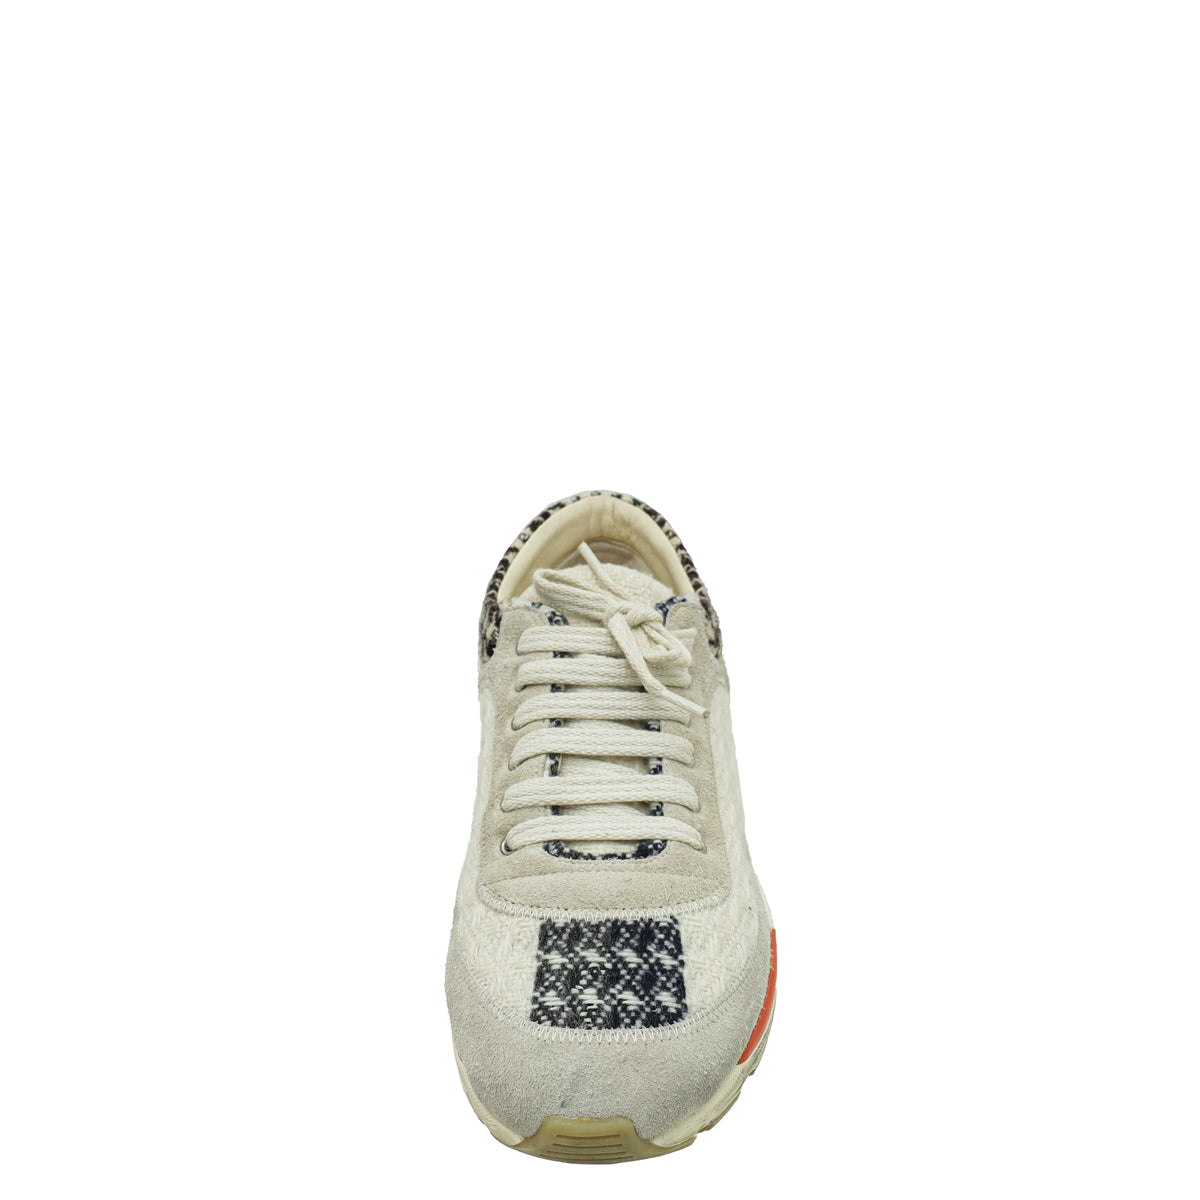 Chanel Light Grey Multicolor Tweed Suede Lace Up Sneakers 40